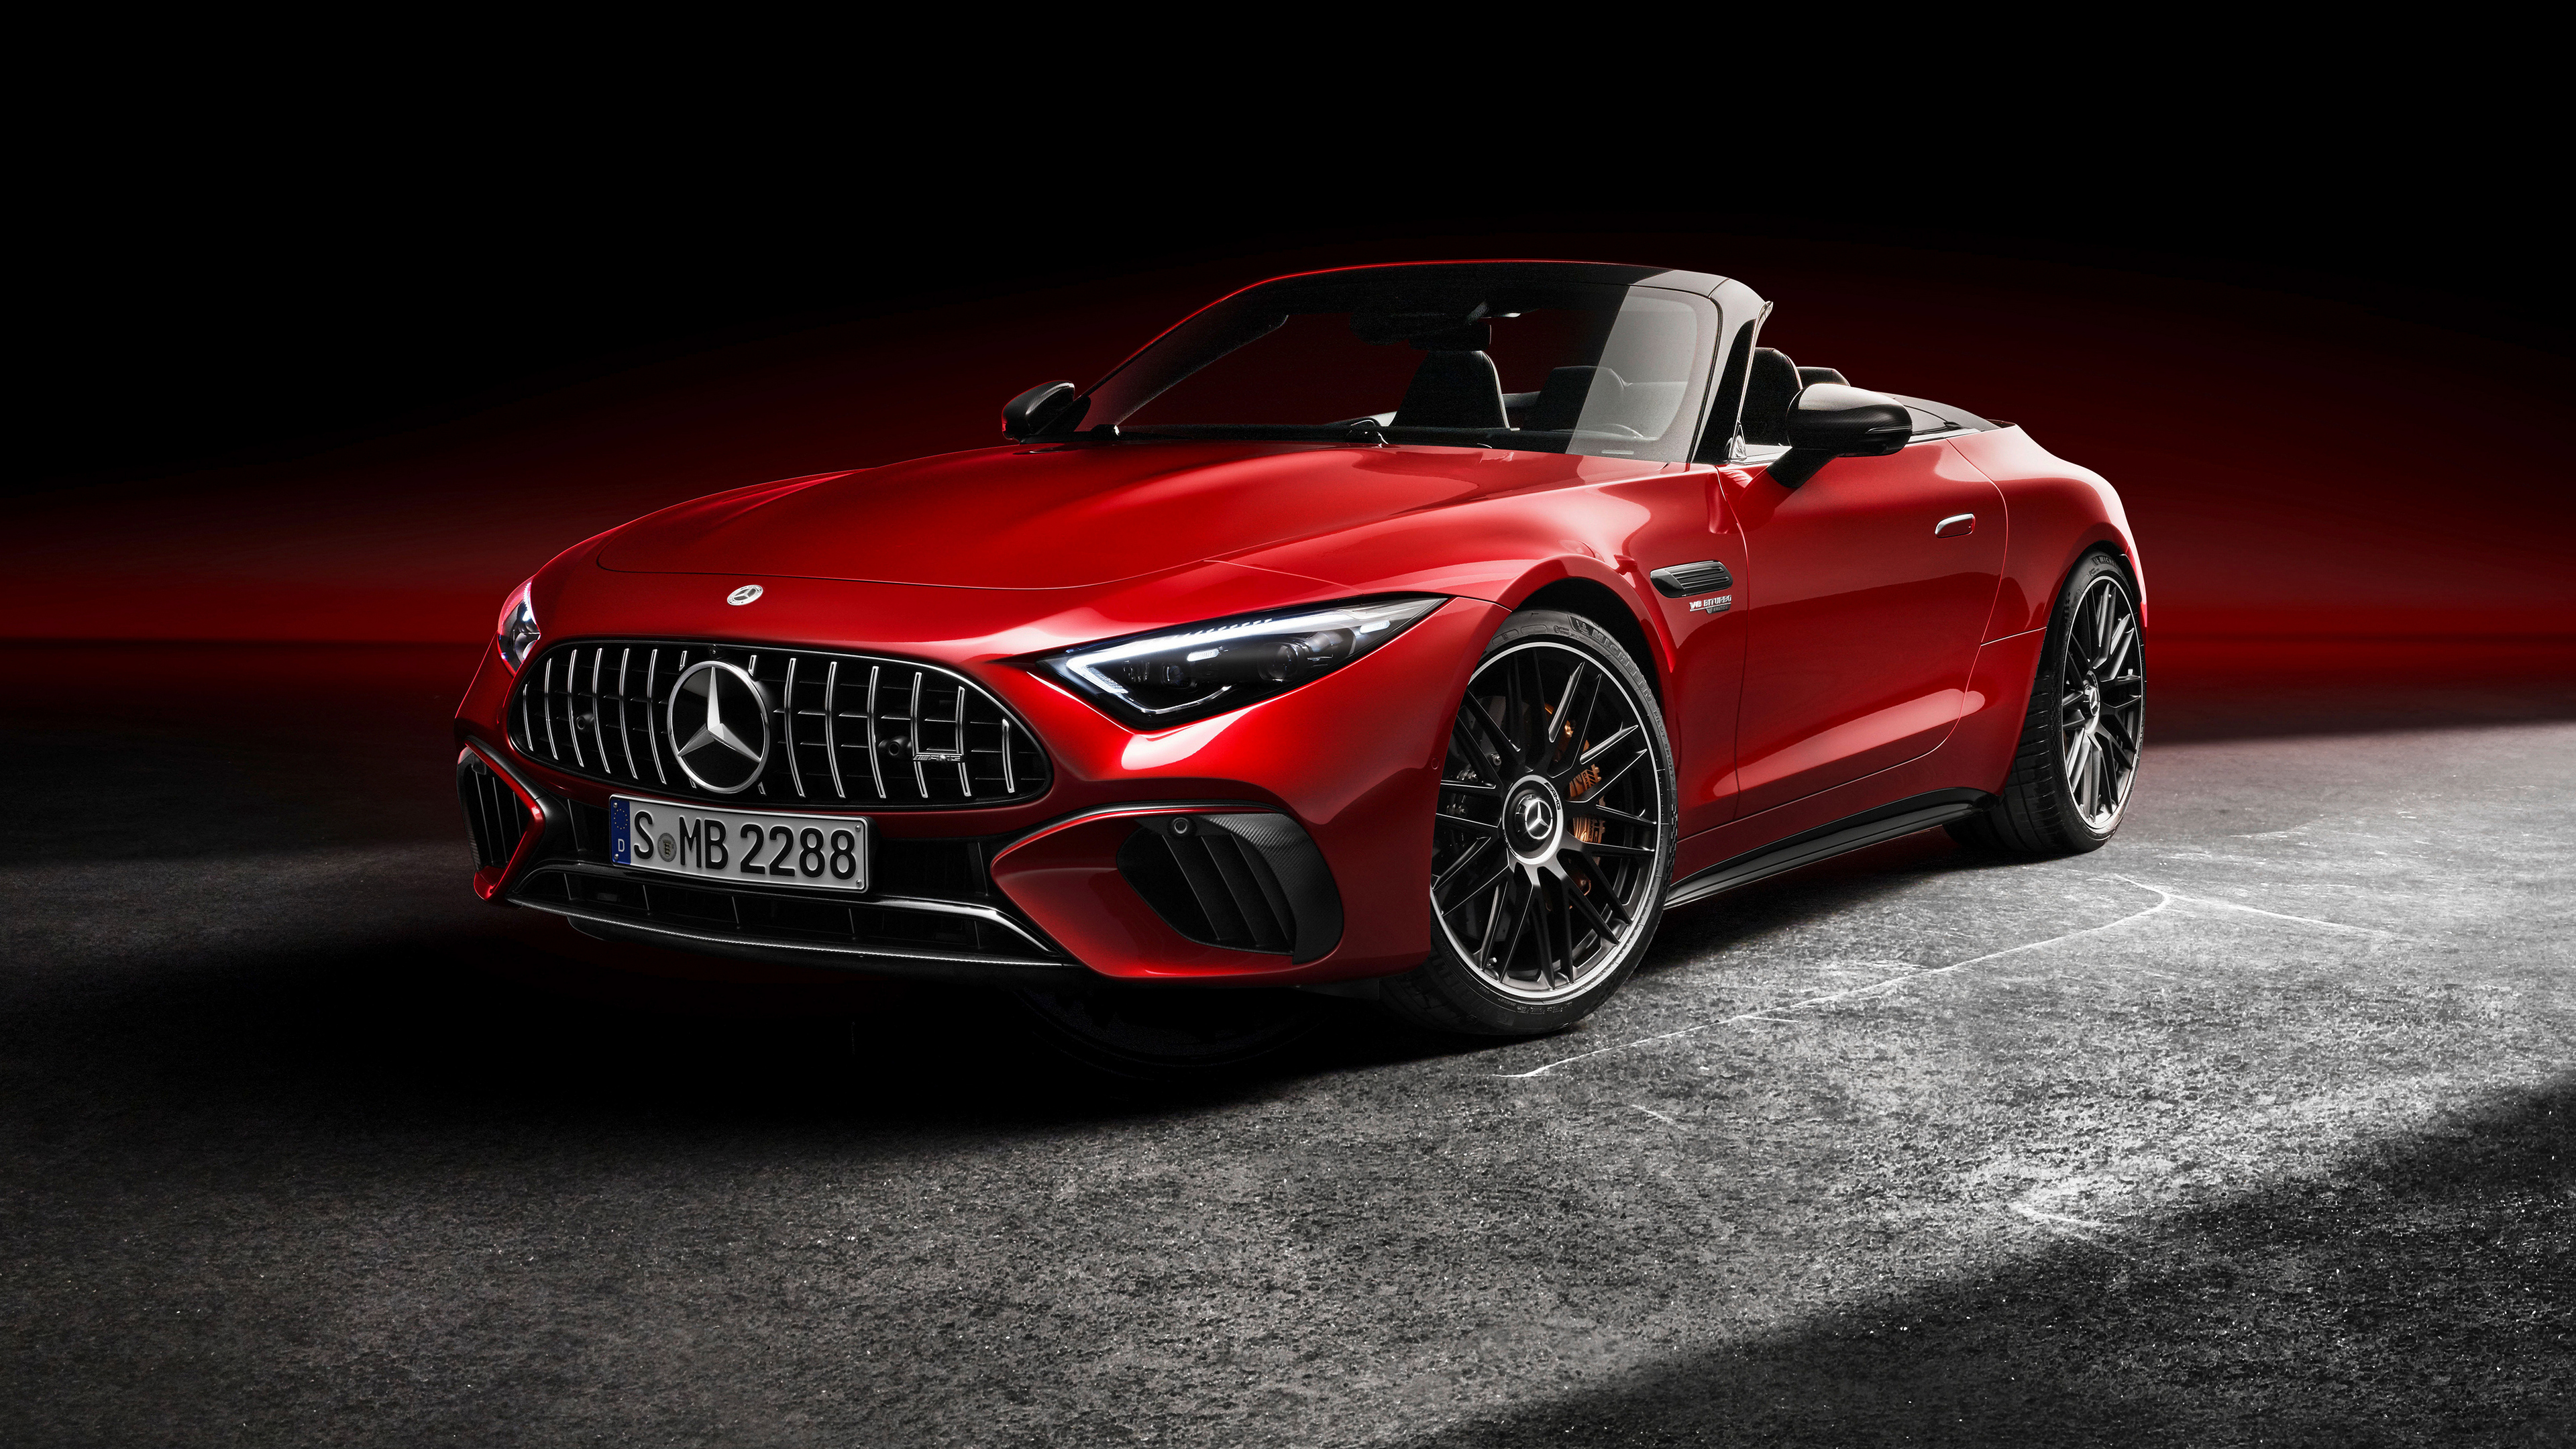 General 3840x2160 sports car red cars vehicle Mercedes-Benz car Mercedes-AMG SL numbers red background convertible German cars